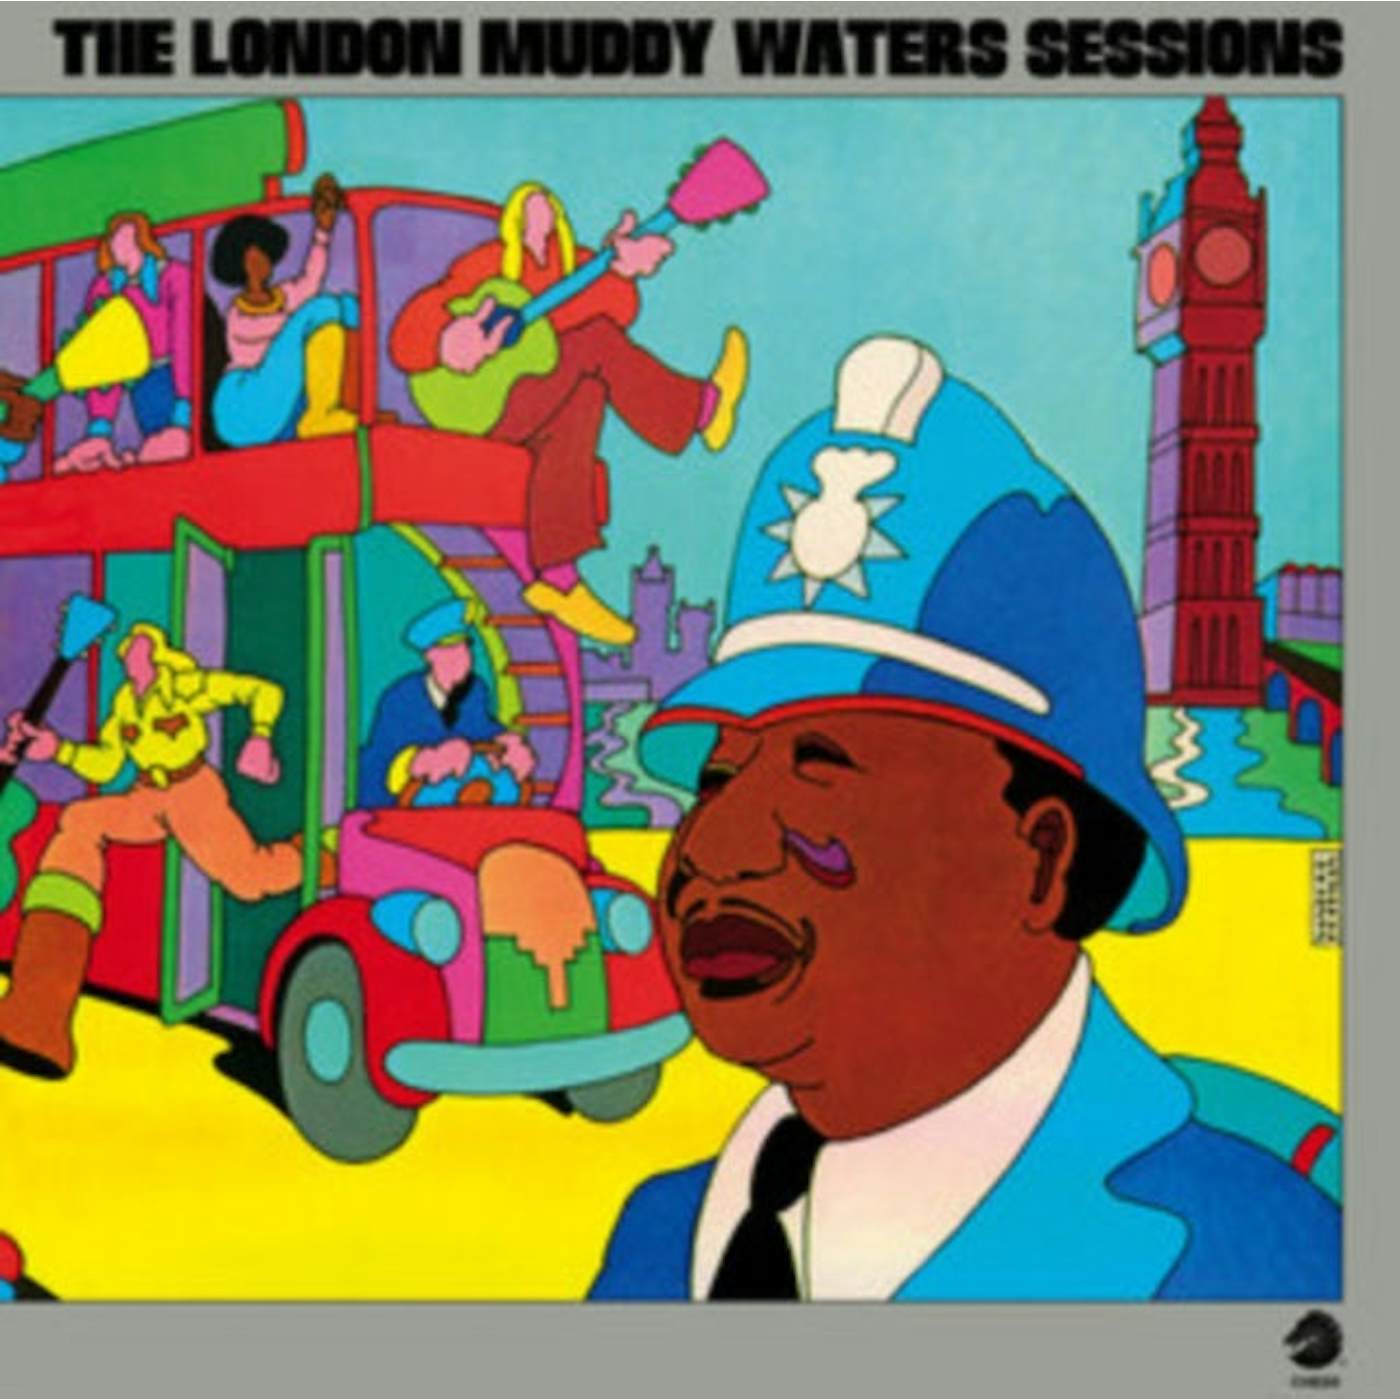 Muddy Waters LP Vinyl Record - The London Muddy Water Sessions